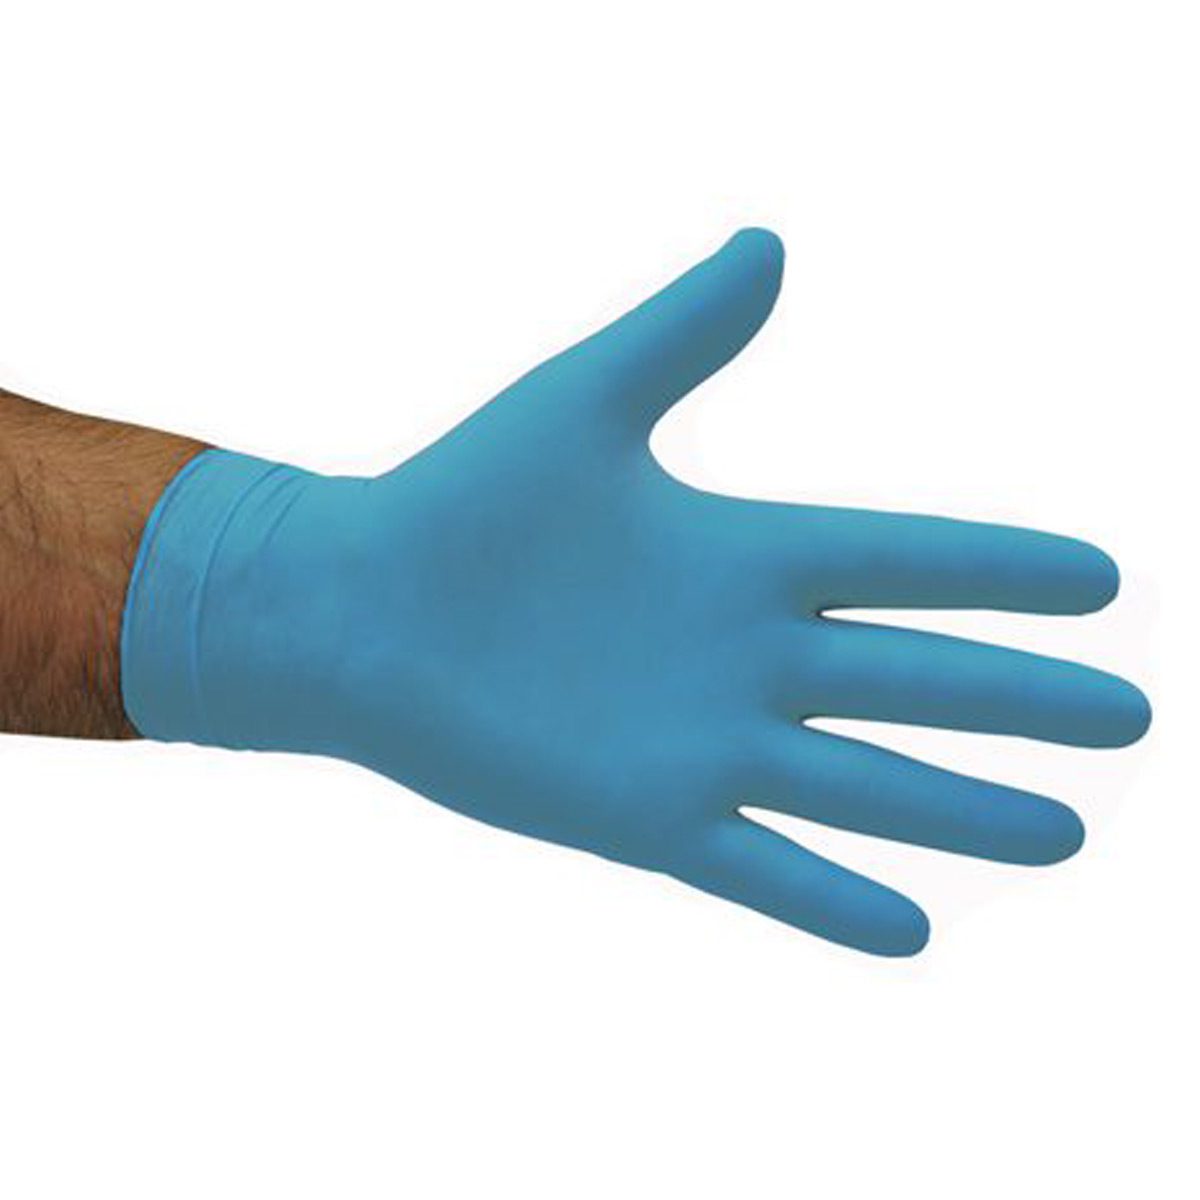 consumables-hospitality-gloves-pomoana-blue-soft-nitrile-powderfree-glove-XL-extra-large-chemical-resistant-waterproof-latex-free-medical-centres-veterinaries-childcare-aged-care-vjs-distributors-345XL